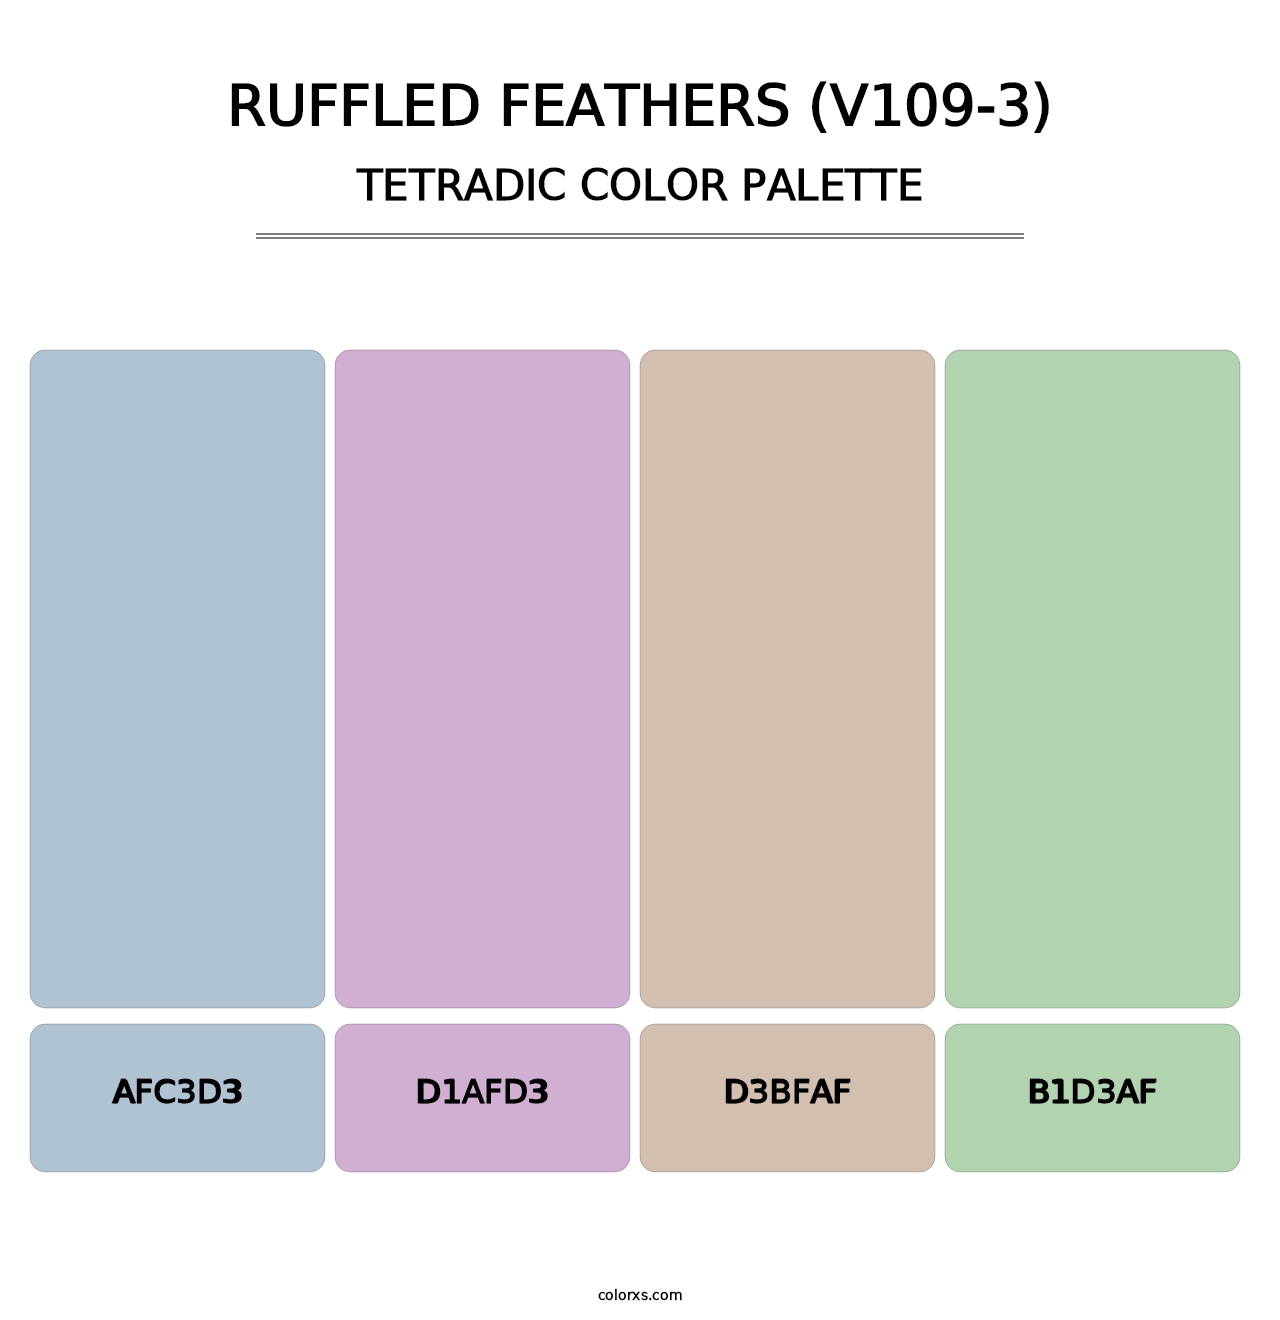 Ruffled Feathers (V109-3) - Tetradic Color Palette